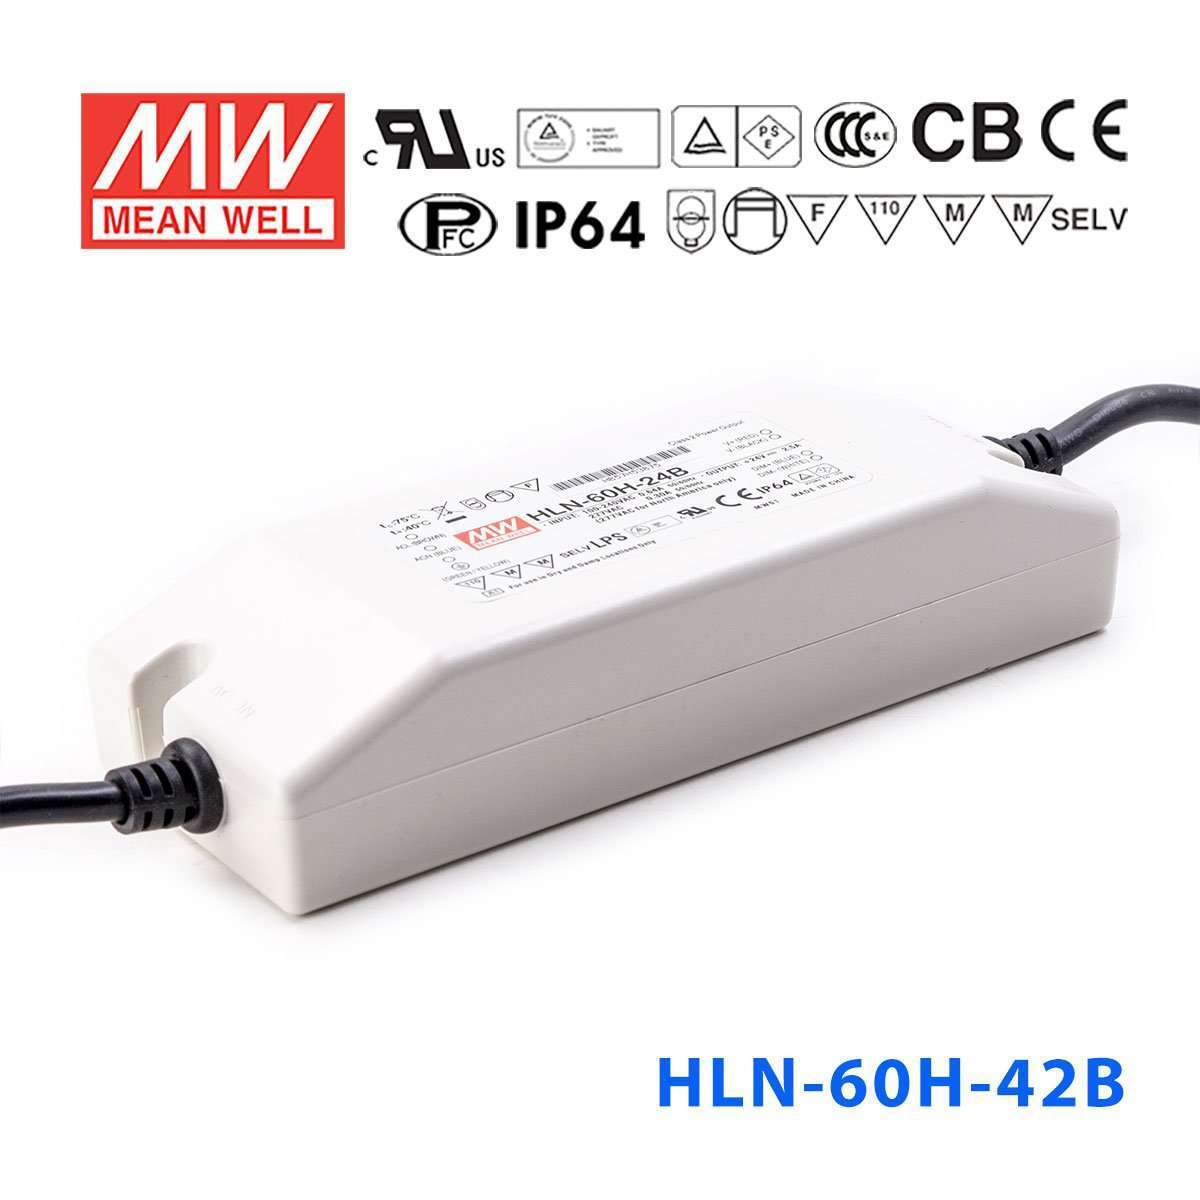 Mean Well HLN-60H-42B Power Supply 60W 42V - IP64, Dimmable